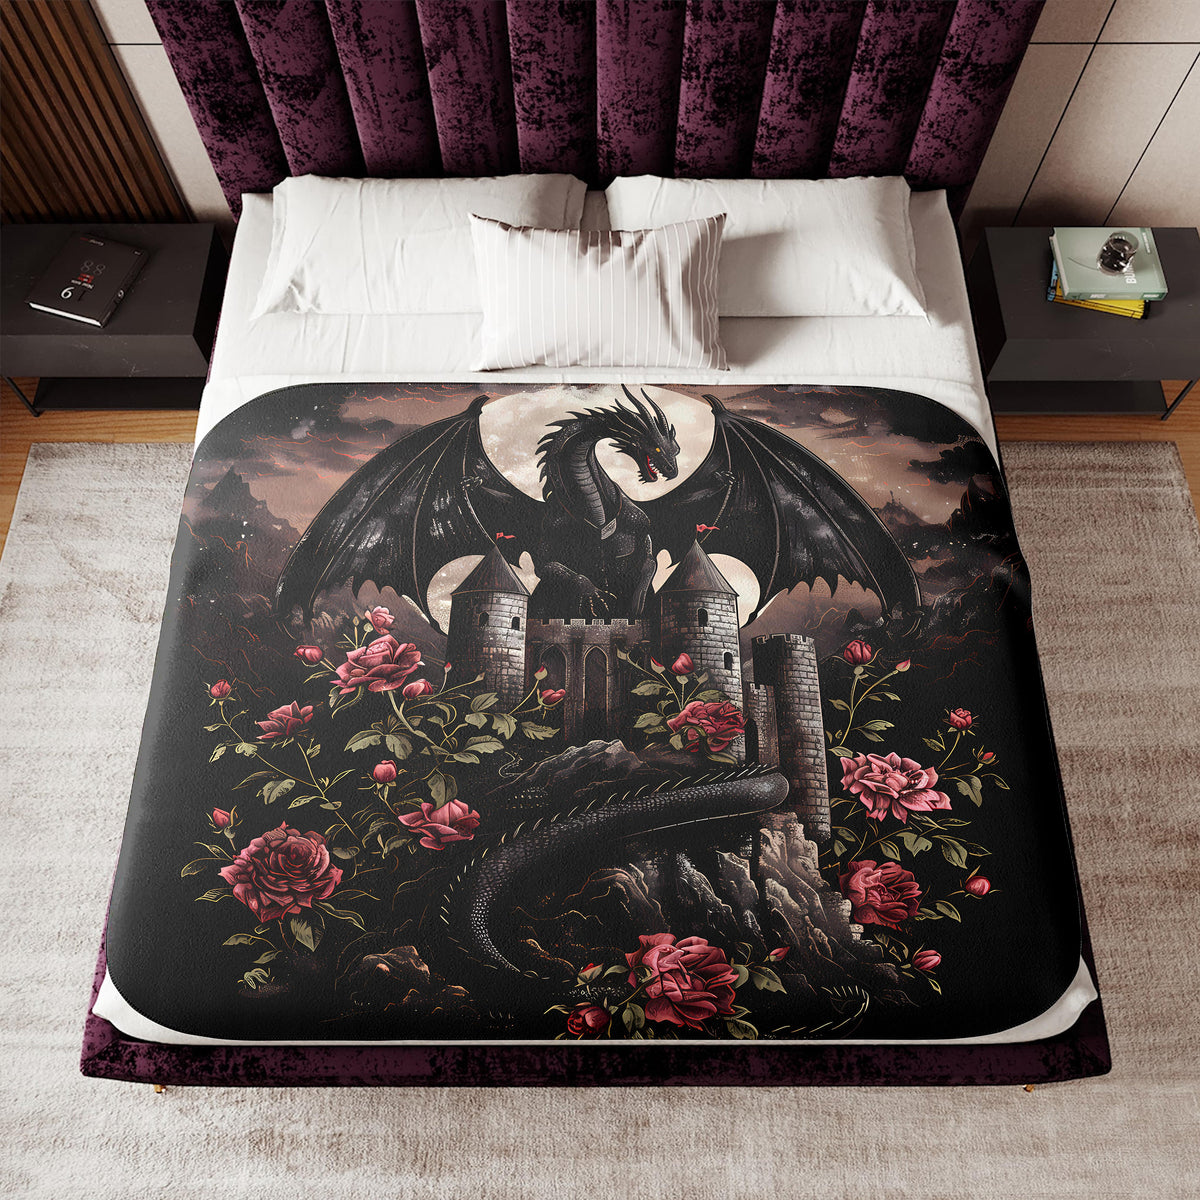 a bed with a black dragon on it